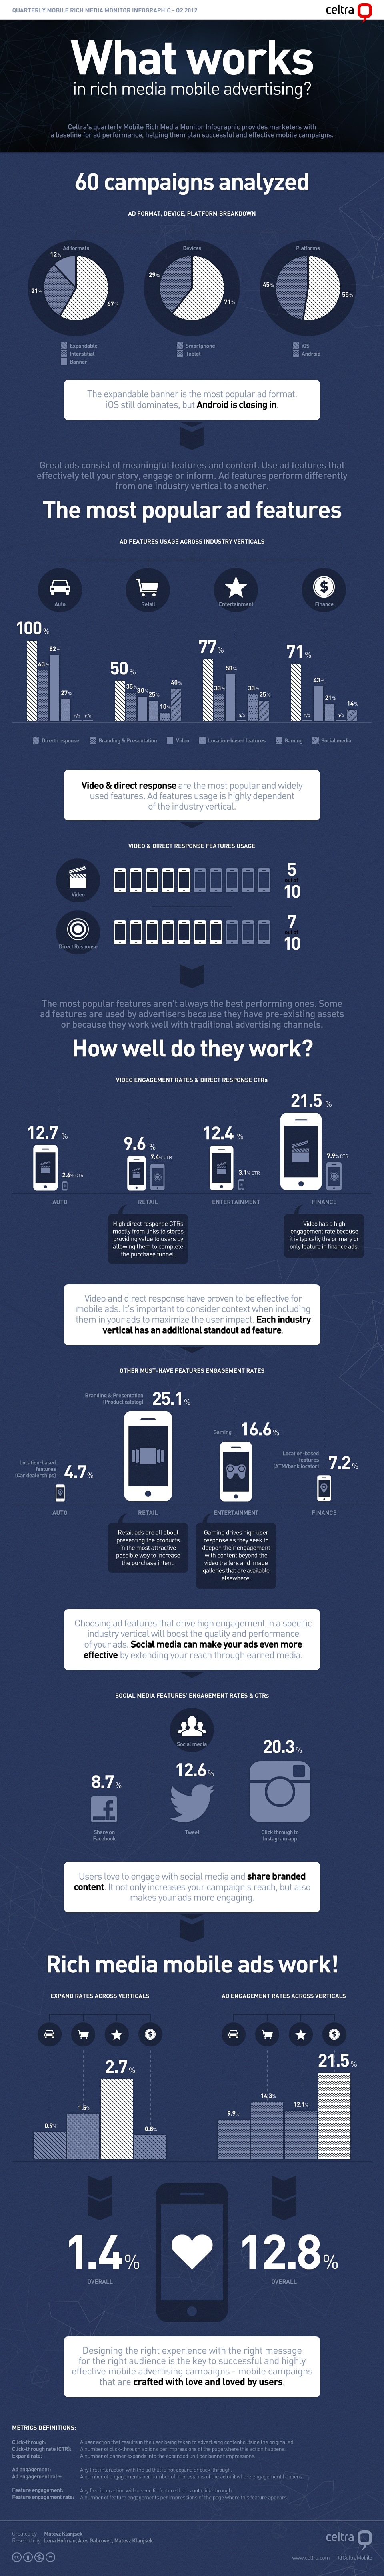 best-mobile-advertising-formats-infographic